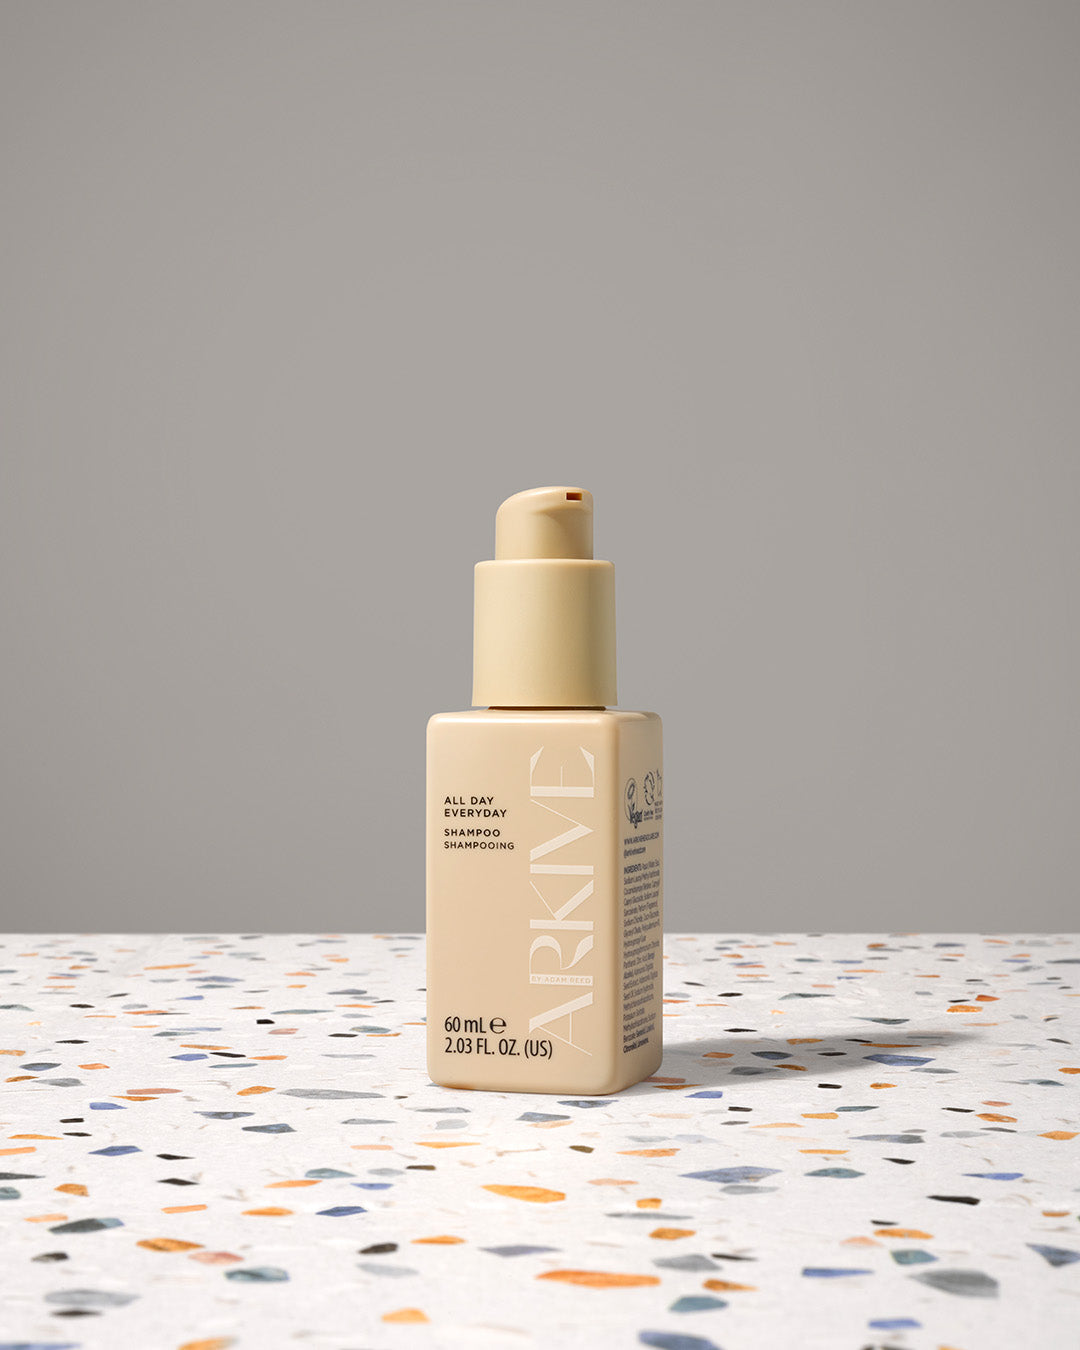 A miniature bottle of Arkive's all day everyday shampoo on a textured table